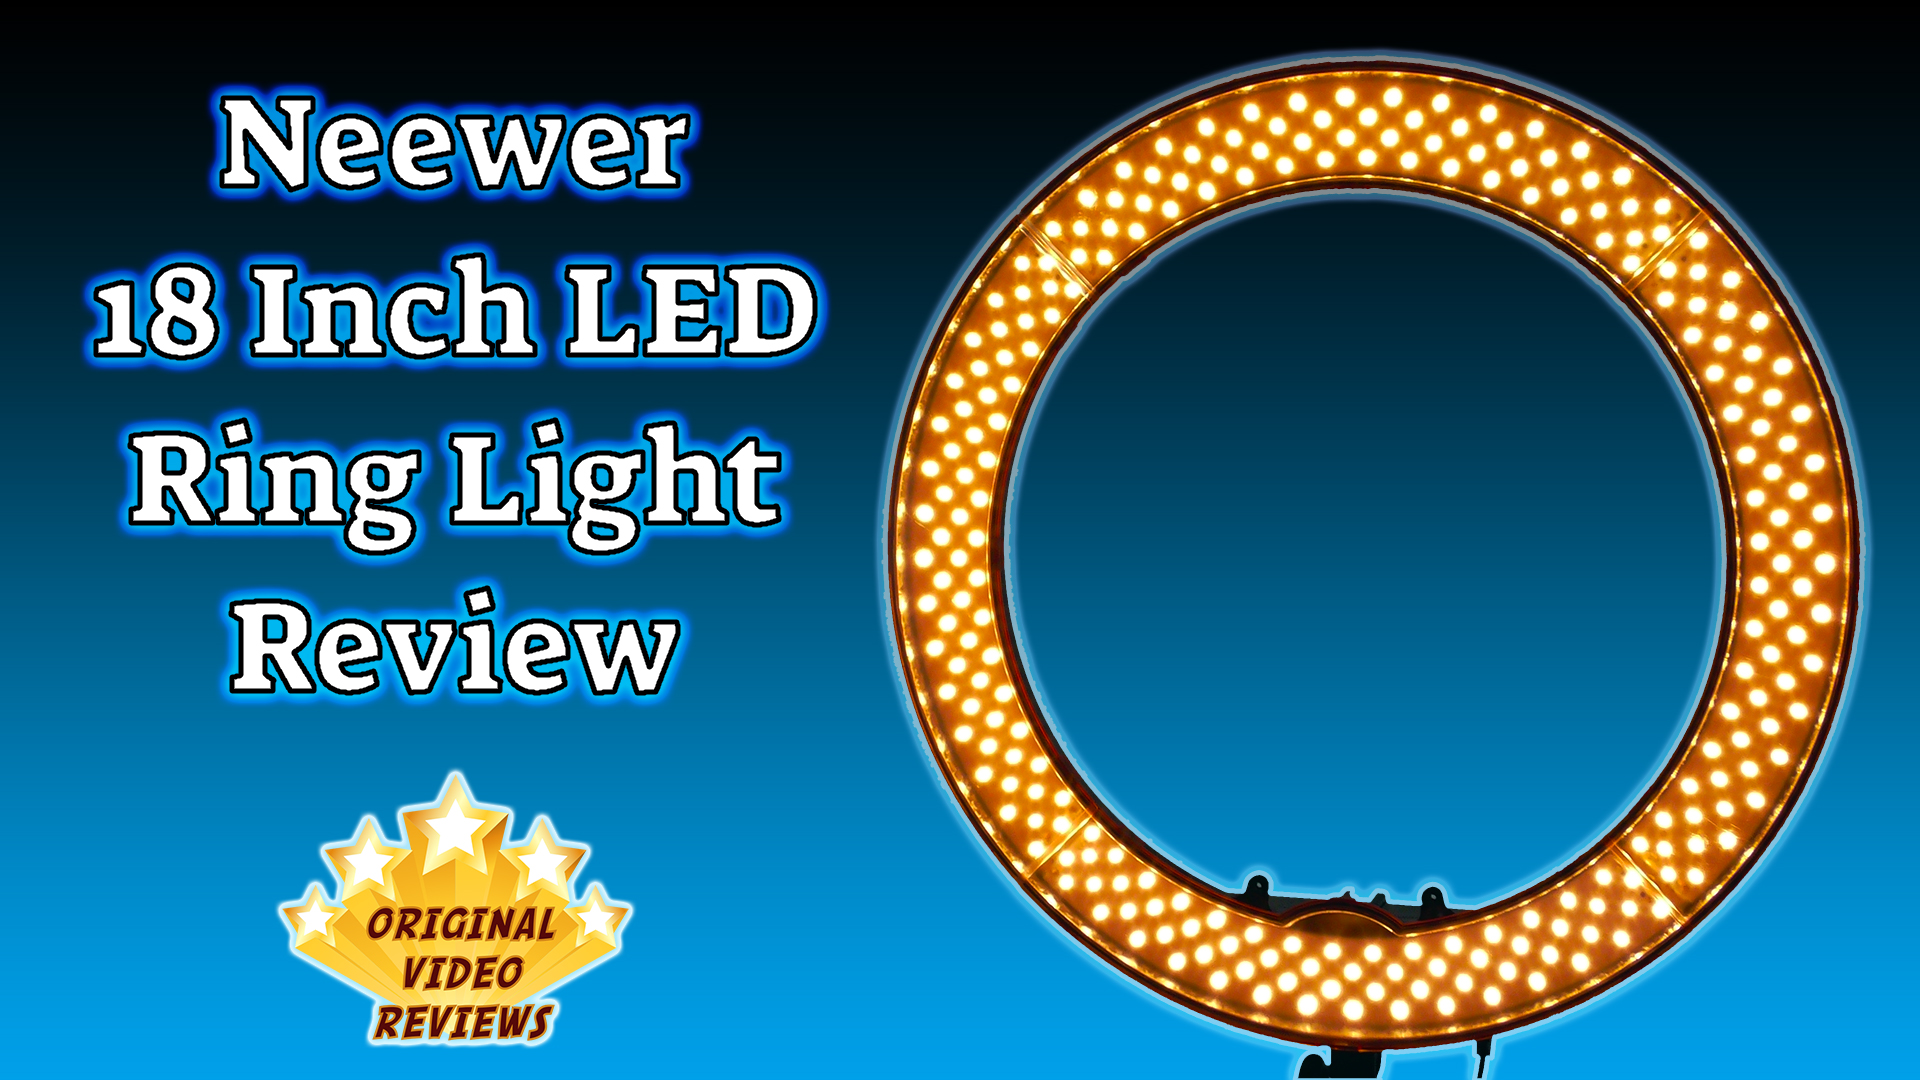 Neewer 18 Inch LED Ring Light Review (Thumbnail)